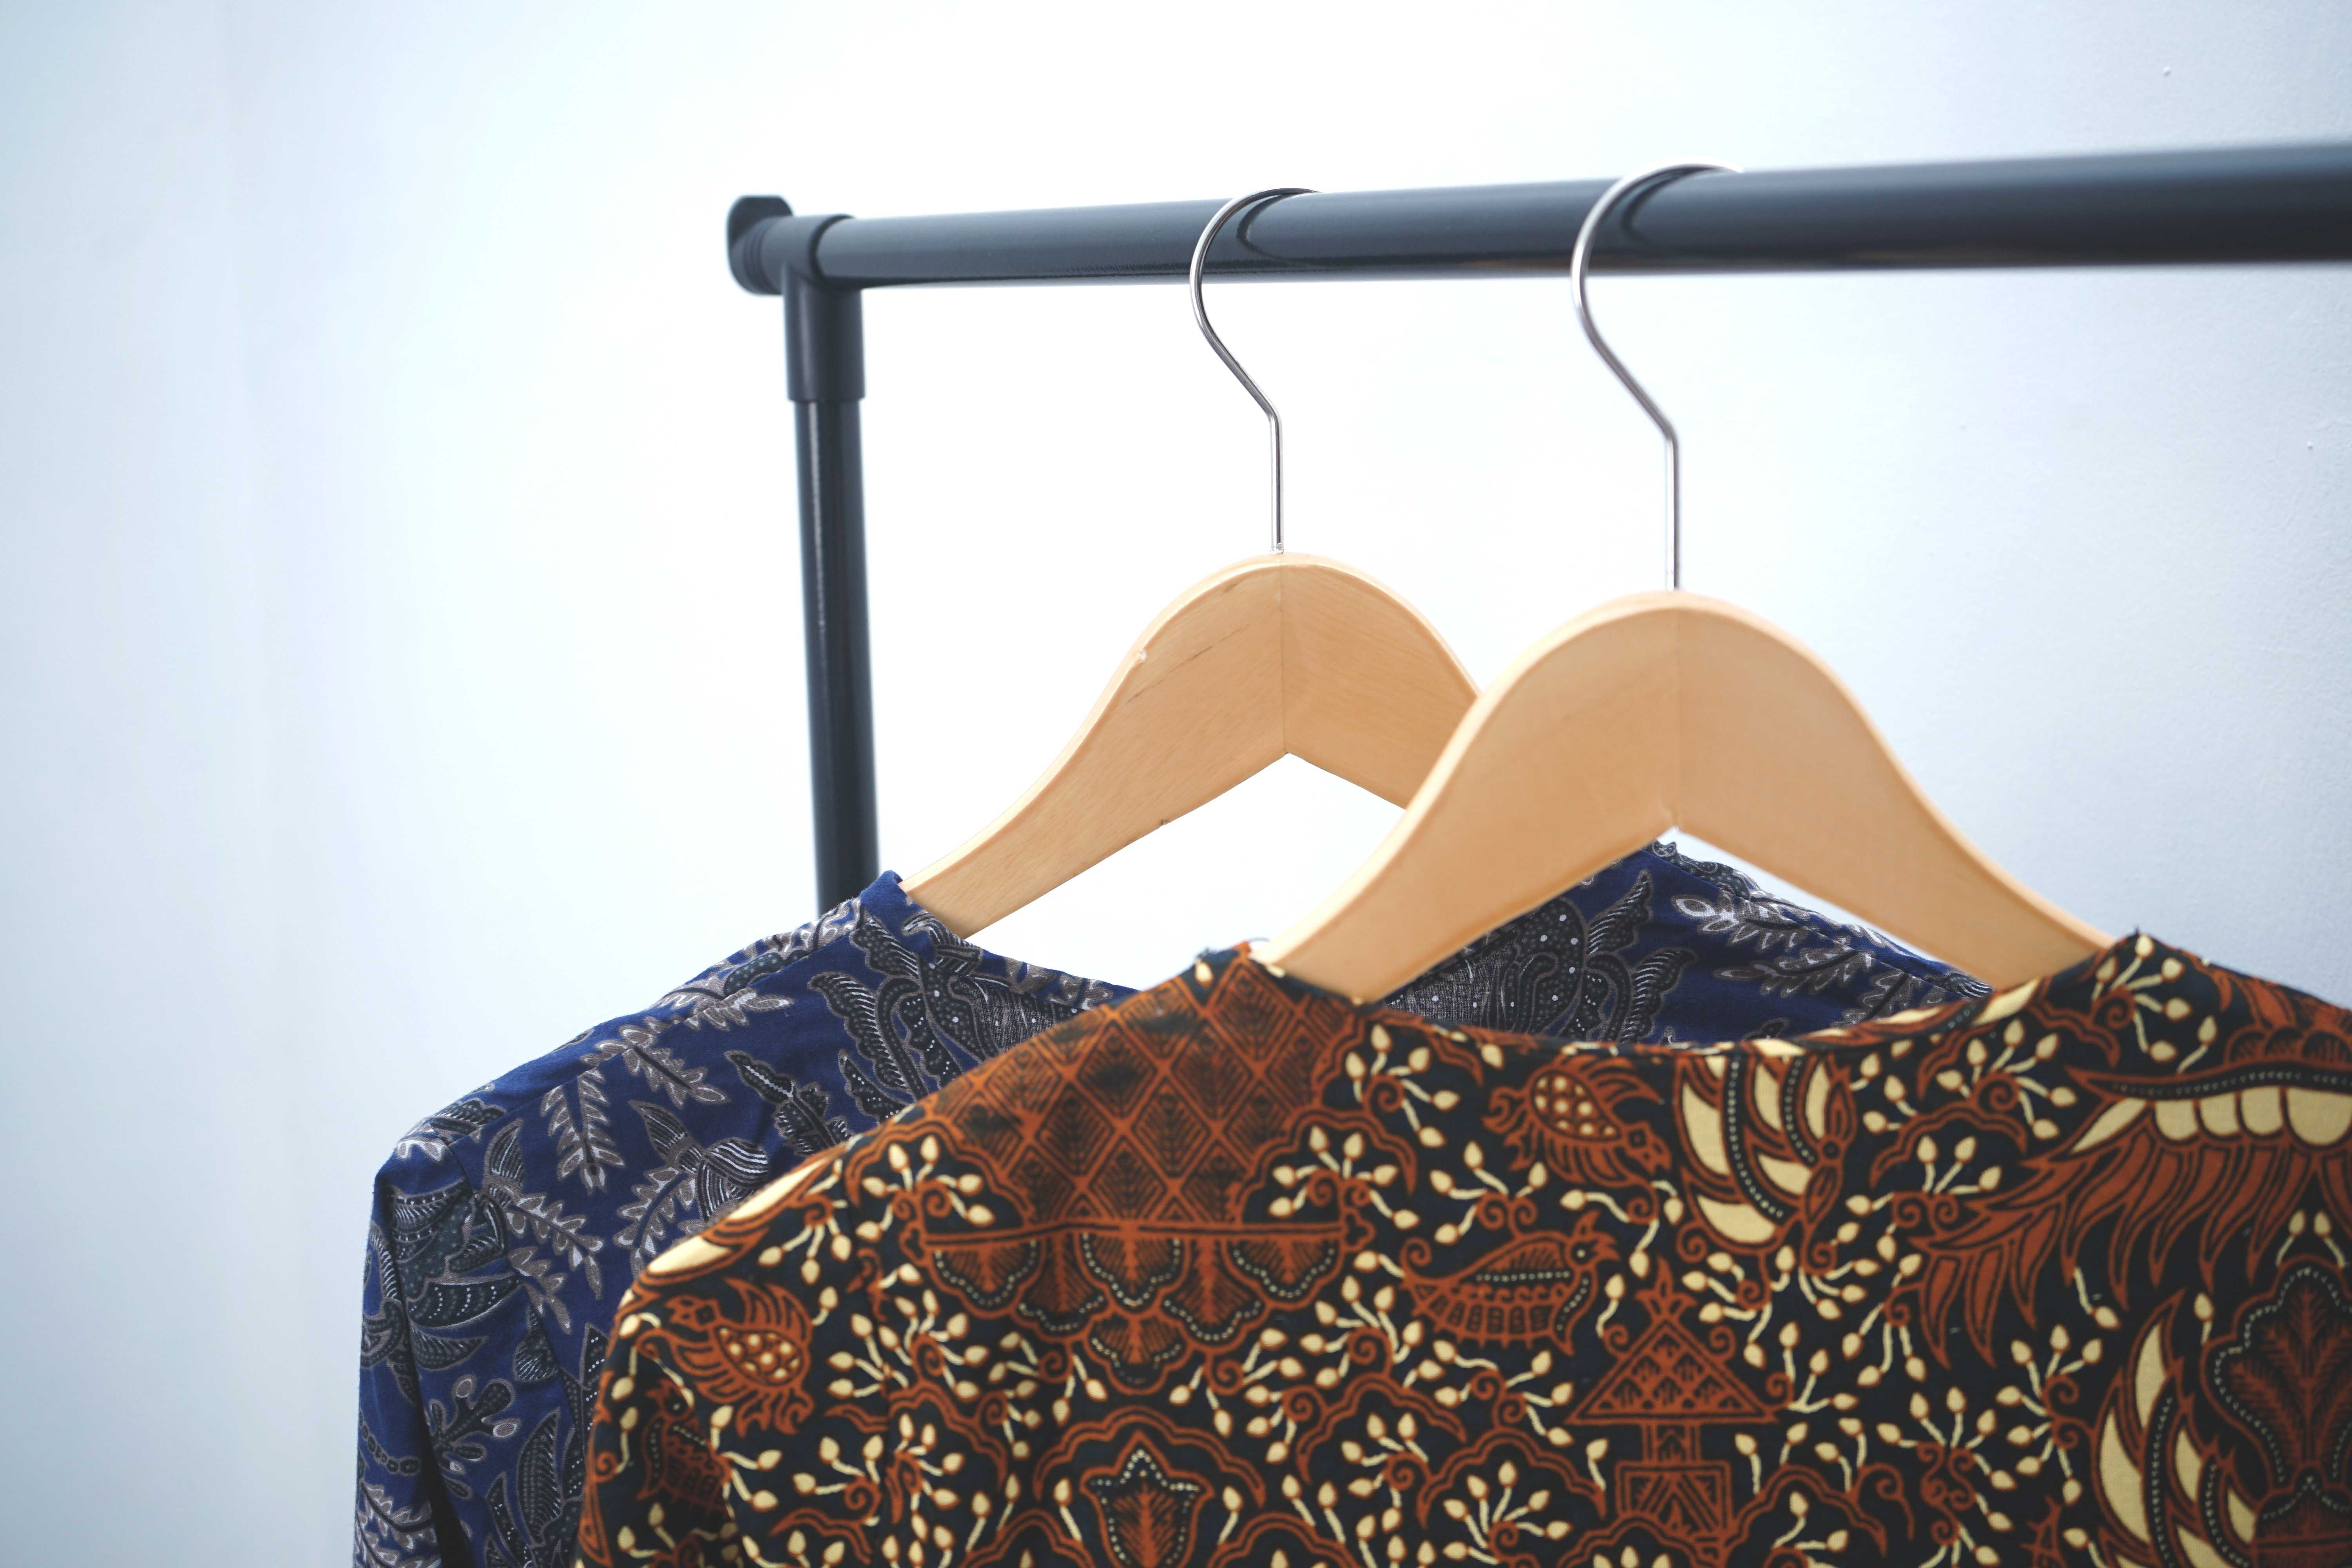 Batik outfits work for both formal and informal occasions, and can also be used as gifts for teachers